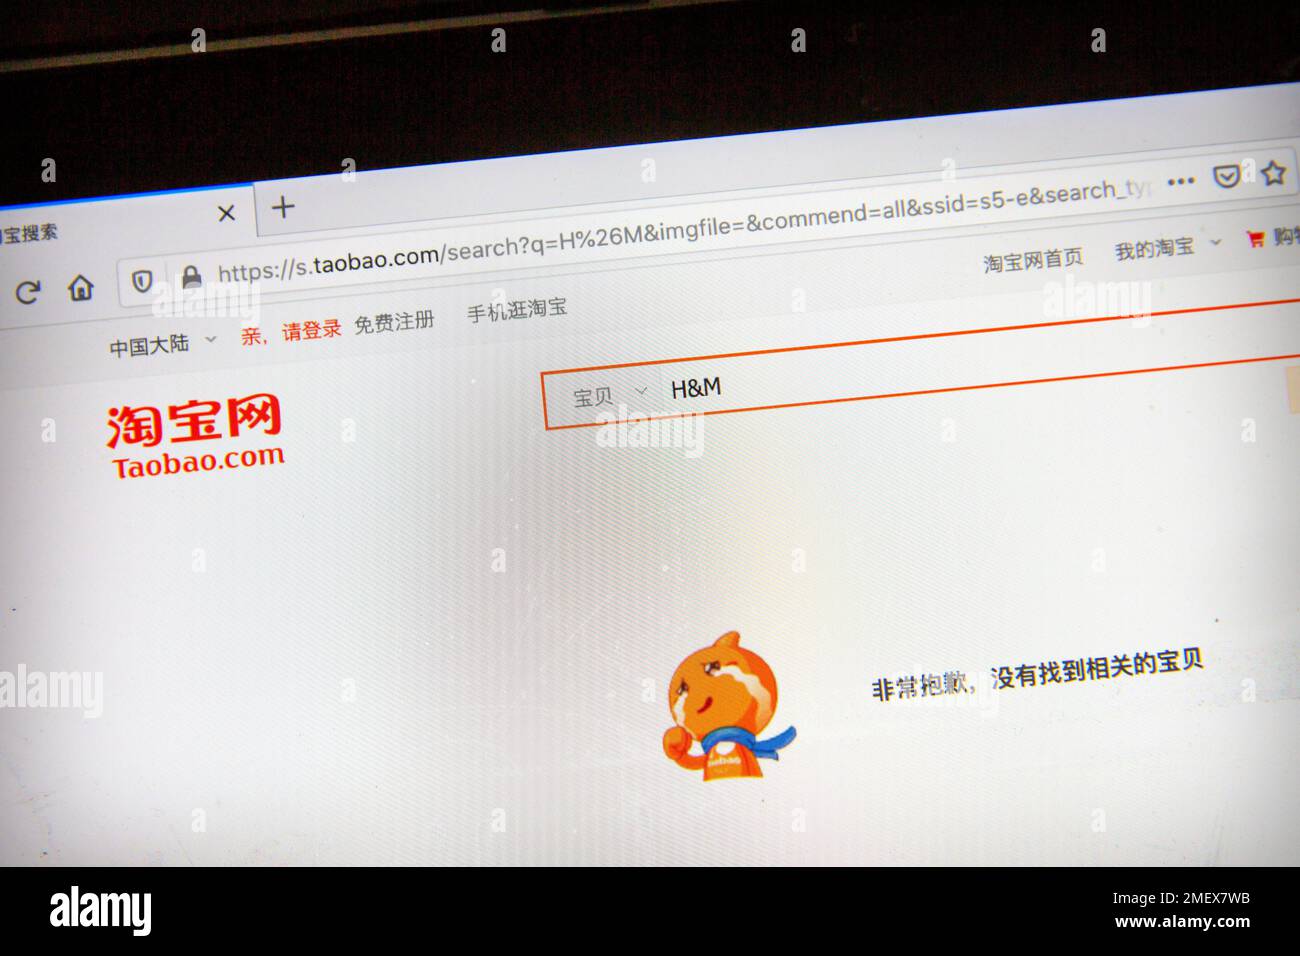 The Chinese e-commerce site Taobao displays the message "Sorry, no related  items were found" when searching for products from clothing retailer H&M,  as seen on a computer screen in Beijing, Friday, March